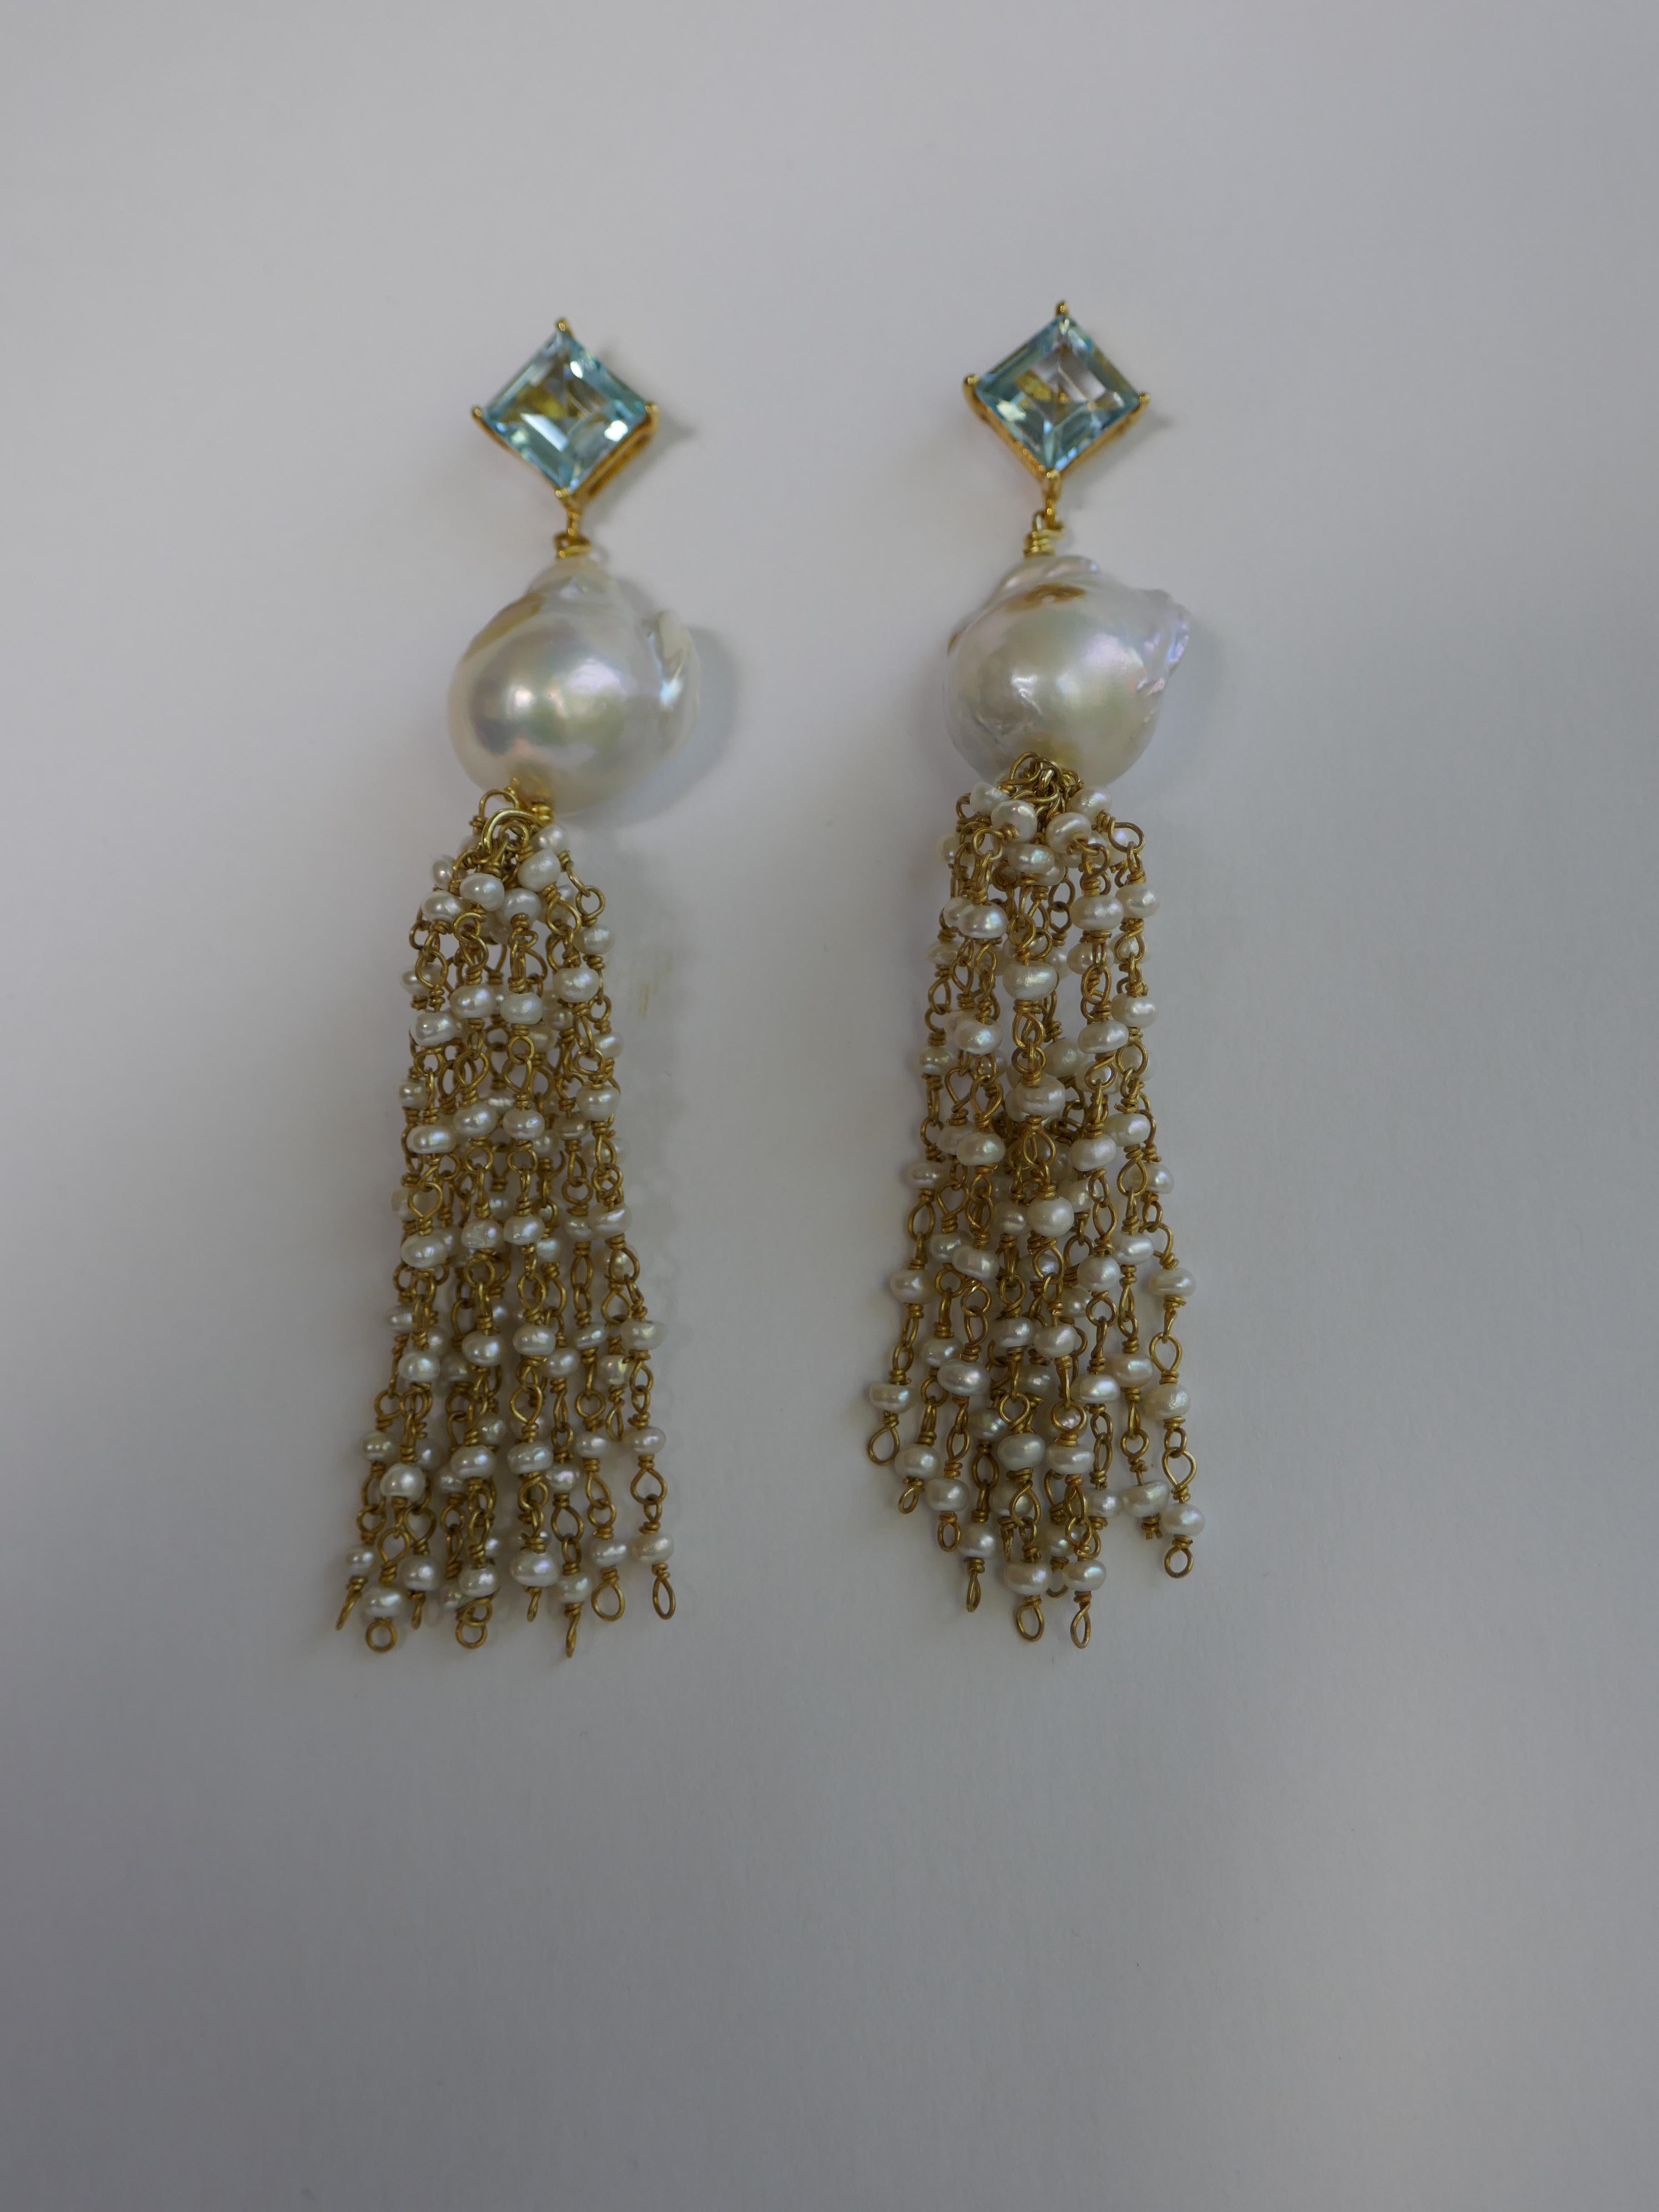 The earrings have a 10x10mm blue topaz  on 14k plated 925 sterling silver post, 14mm baroque cultured pearls and keshi pearls chain tassel. These earrings can be dressed up or down.  The large backs are gold filled.  The earrings are 3.375 inches